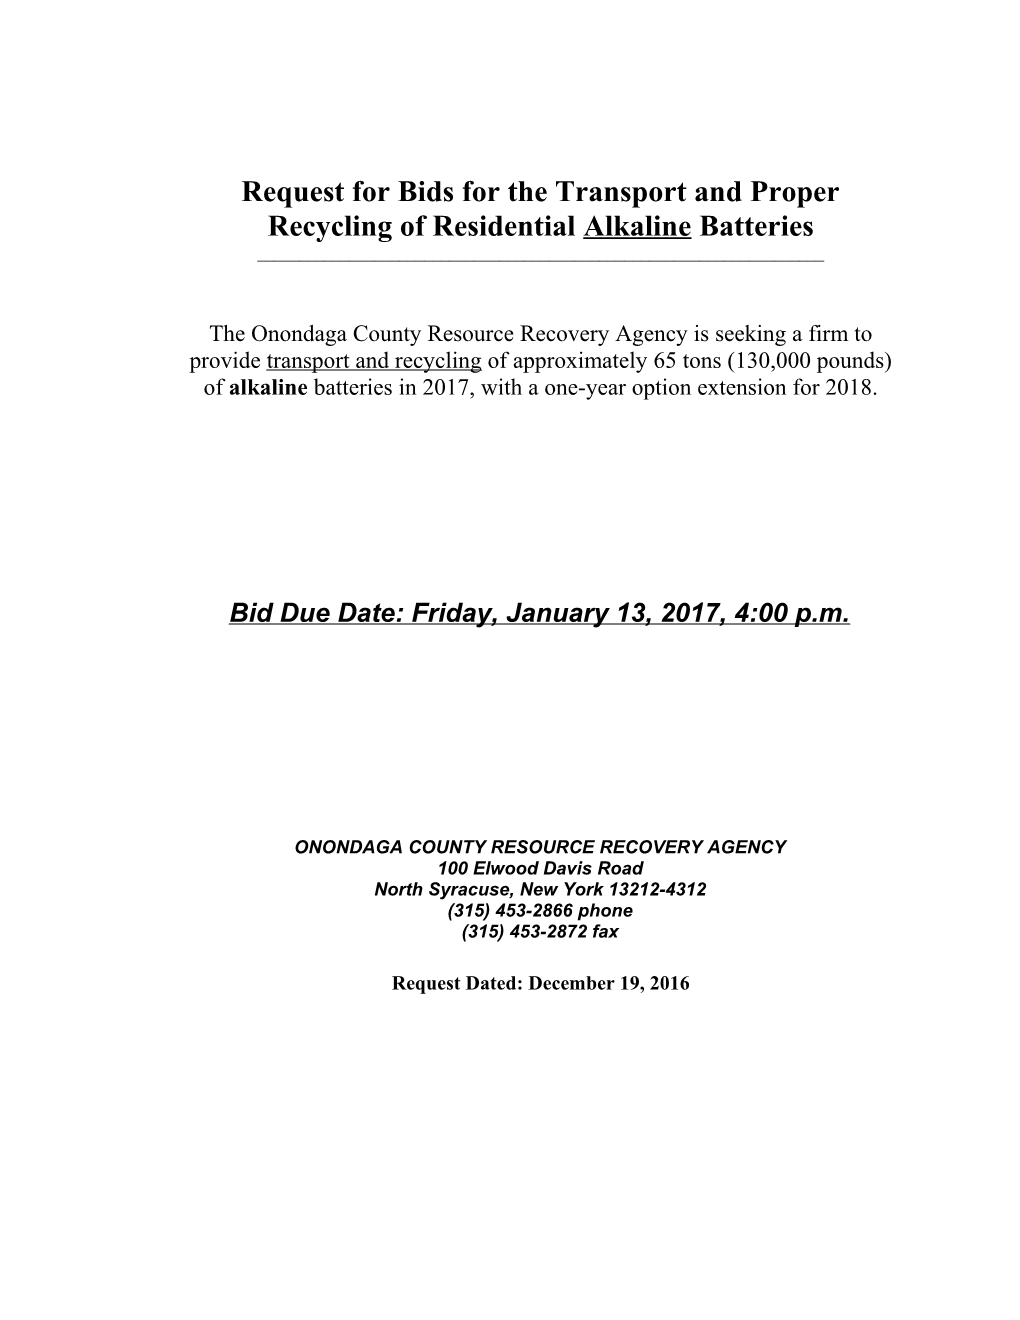 Request for Bids for the Transport and Proper Recycling of Residential Alkalinebatteries